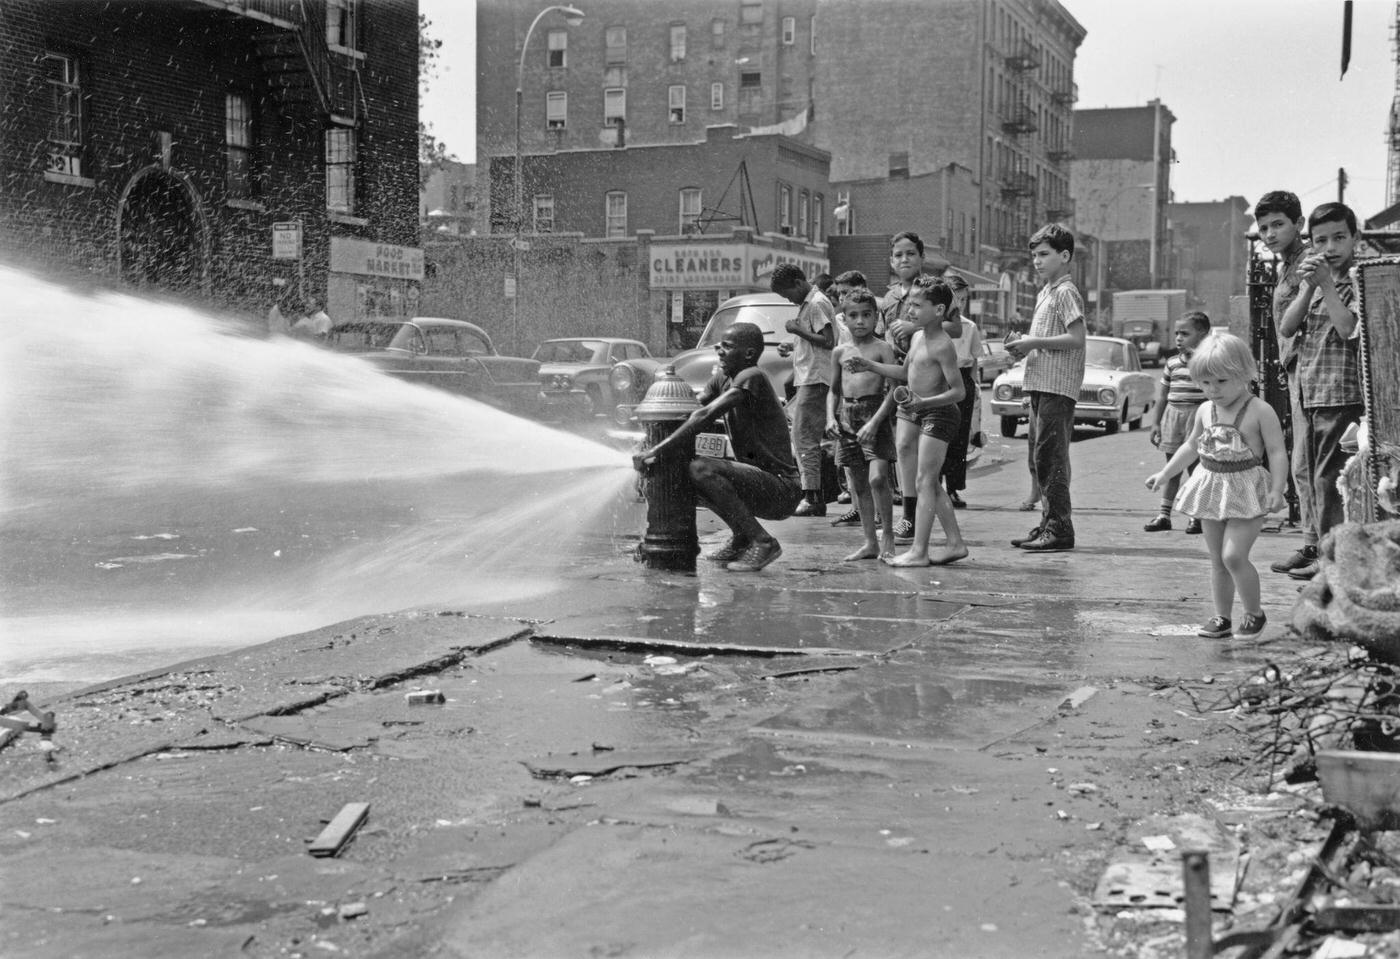 Summer In The City: Children Stand And Watch As A Young Boy Opens A Fire Hydrant In Harlem, Manhattan, 1955